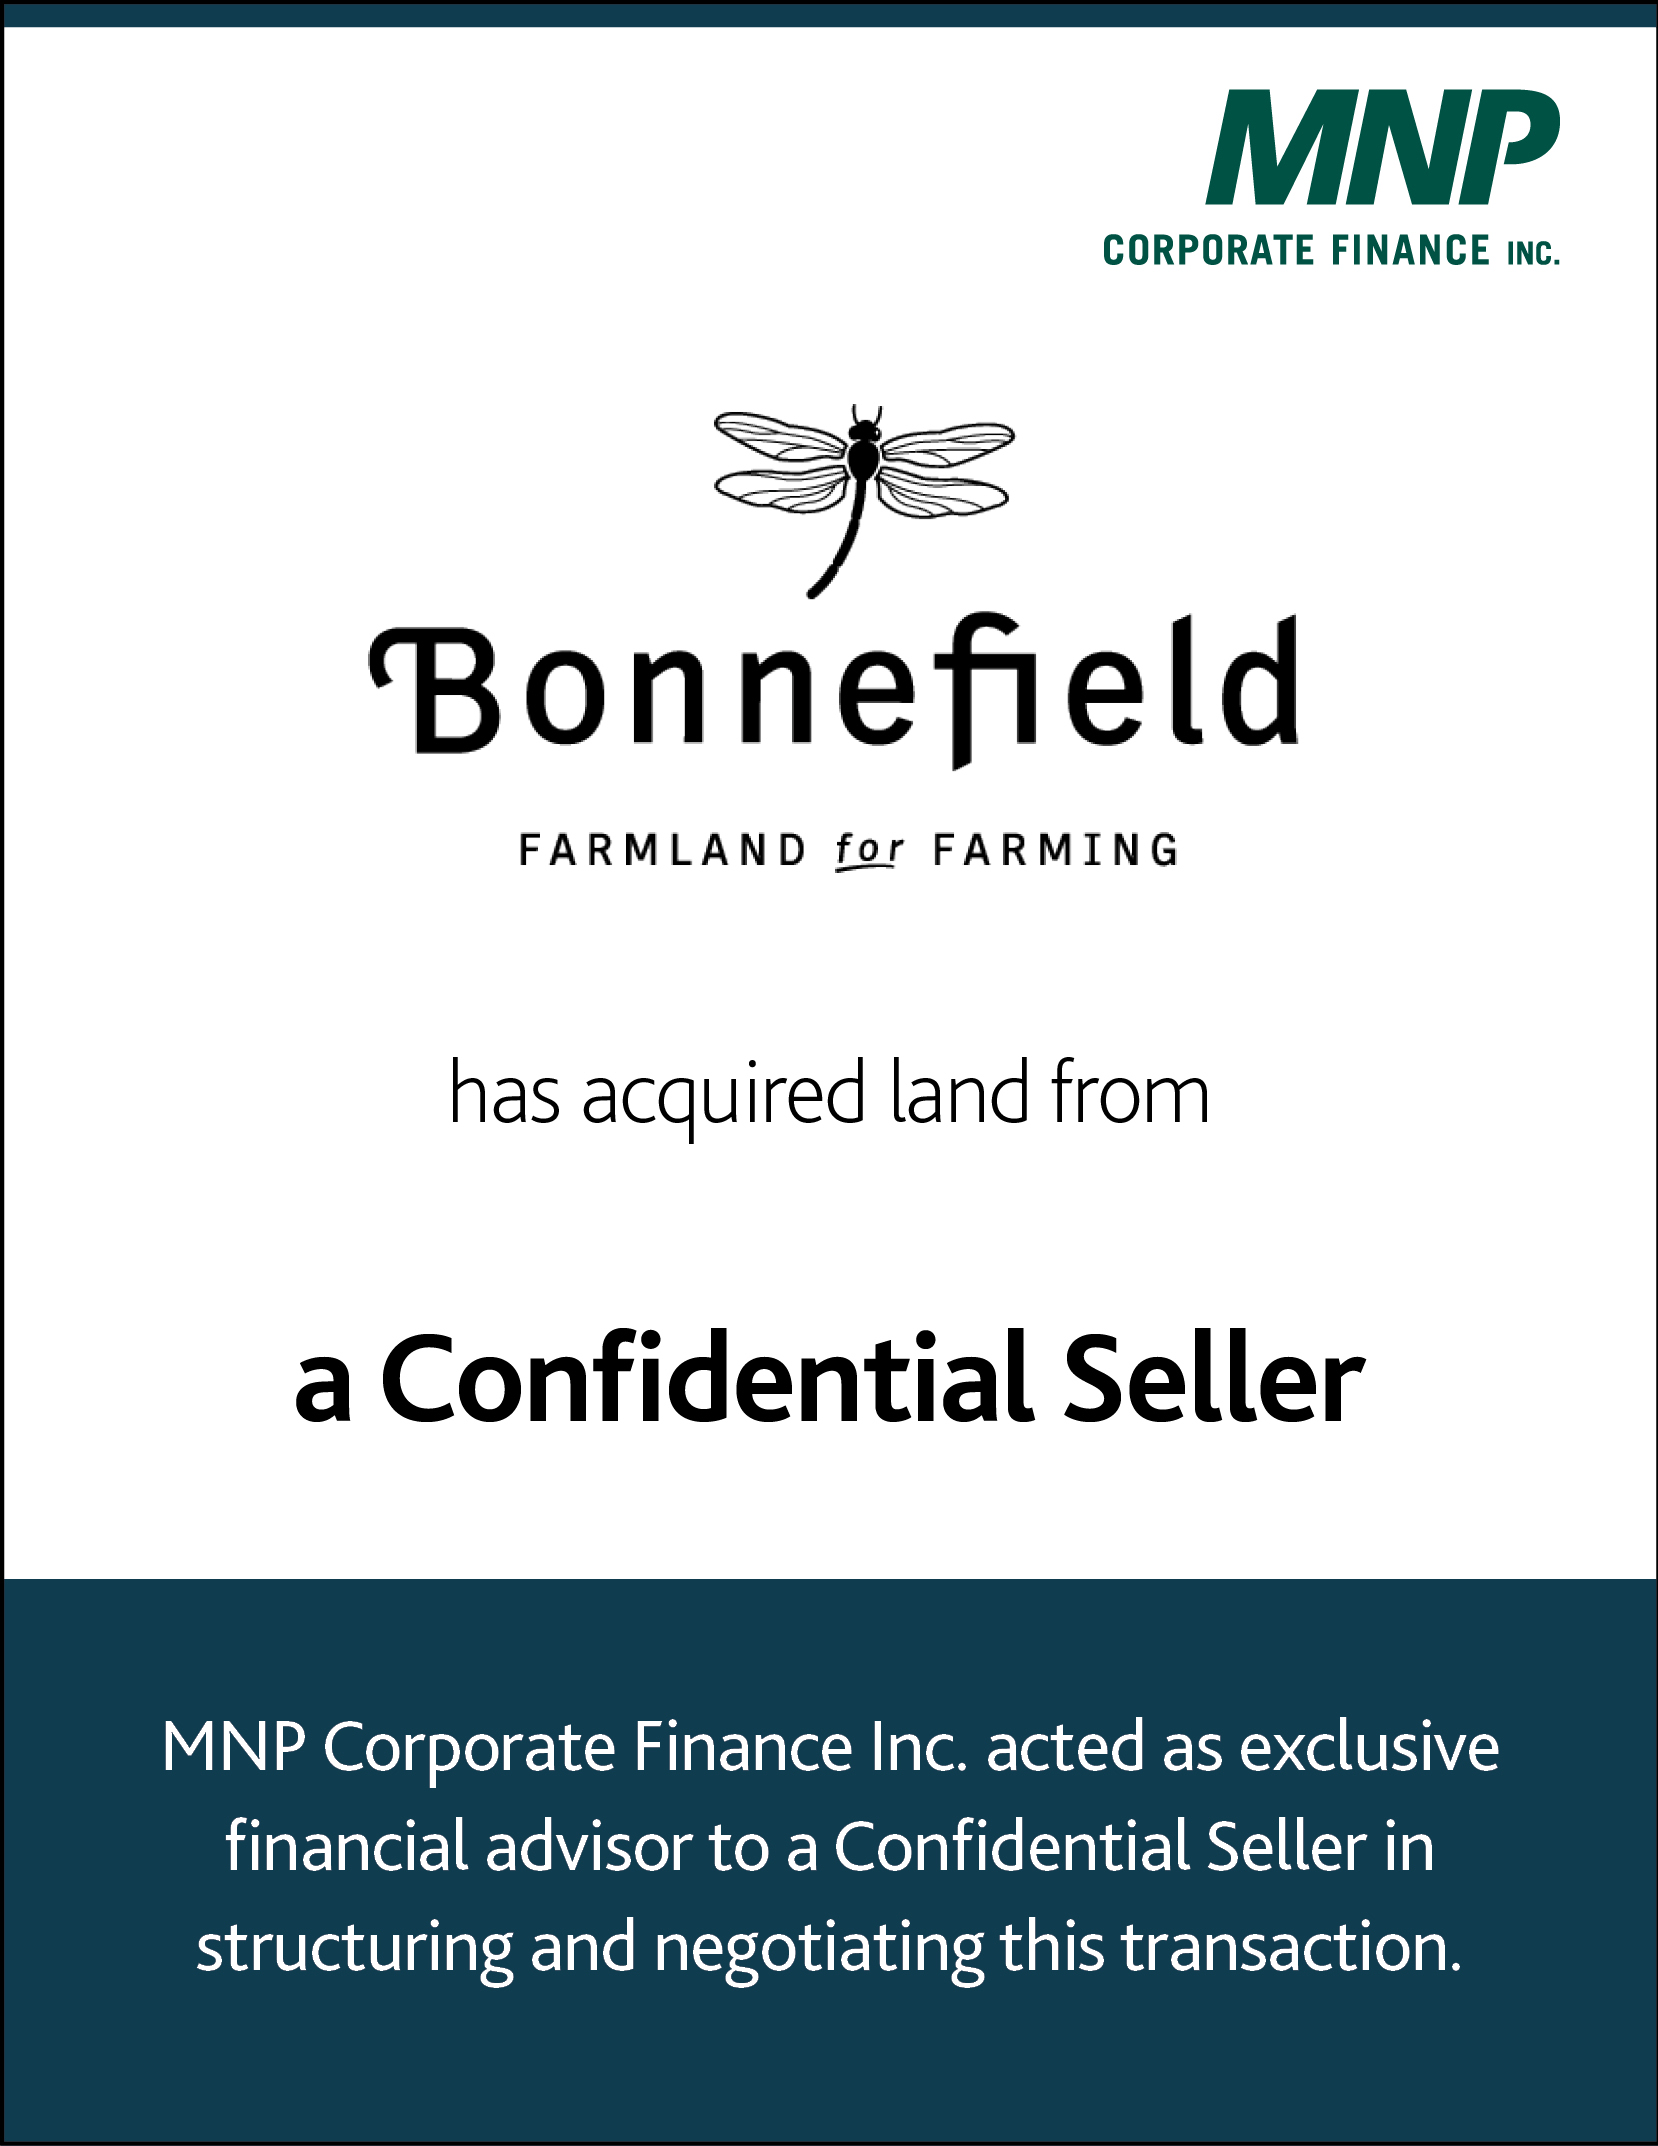 Bonnefield Farmland for Farming has acquired land from a confidential seller